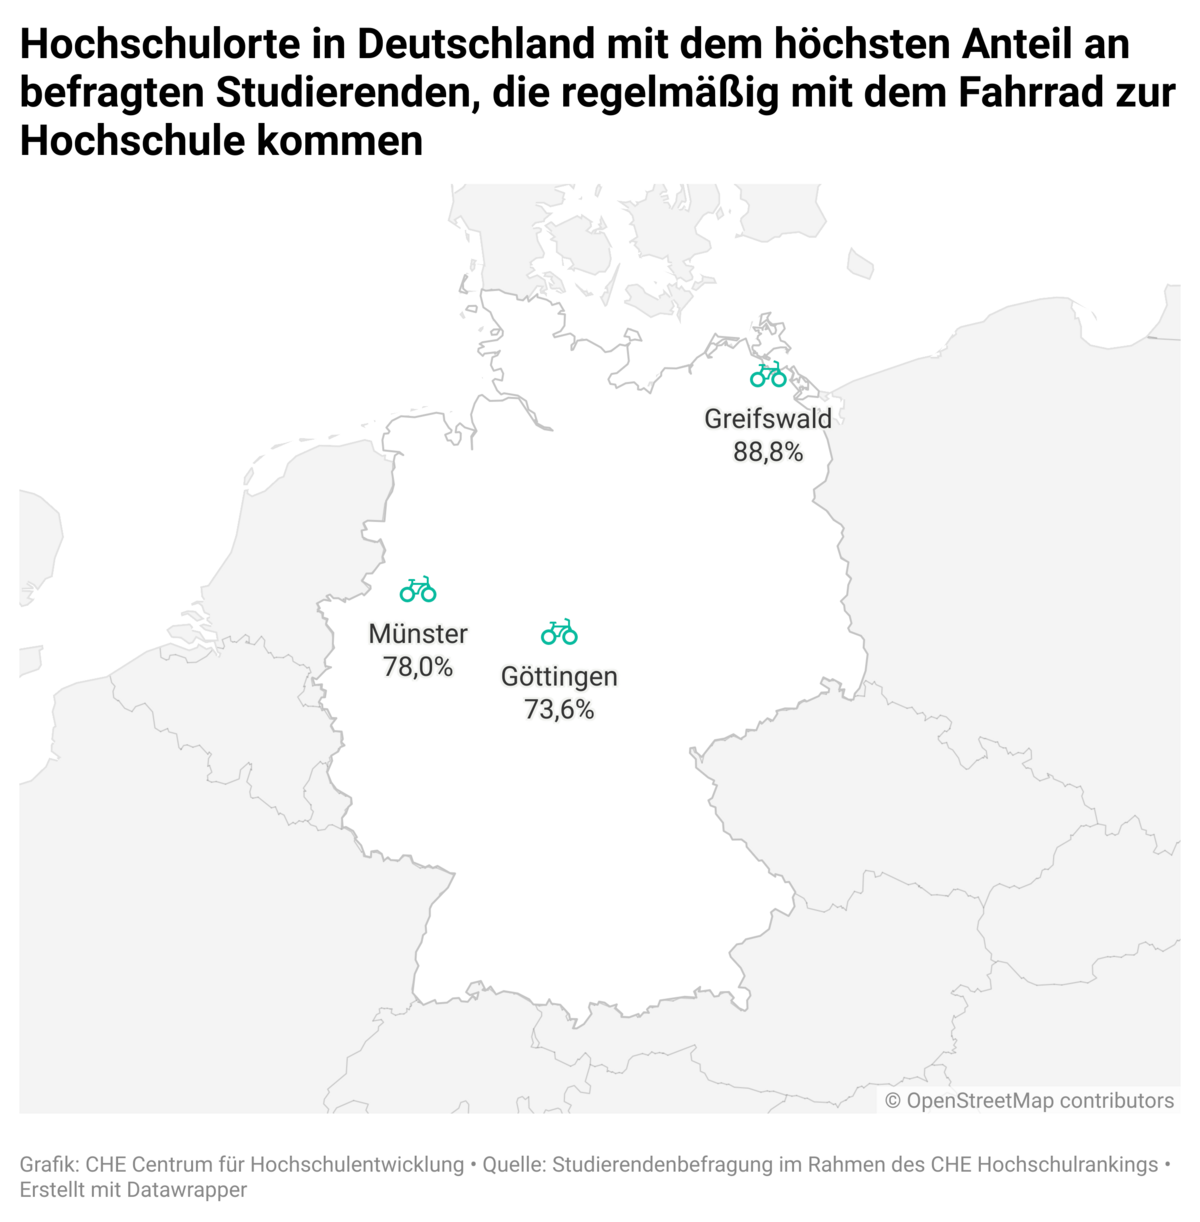 University locations in Germany with the highest proportion of surveyed students who regularly cycle to university 